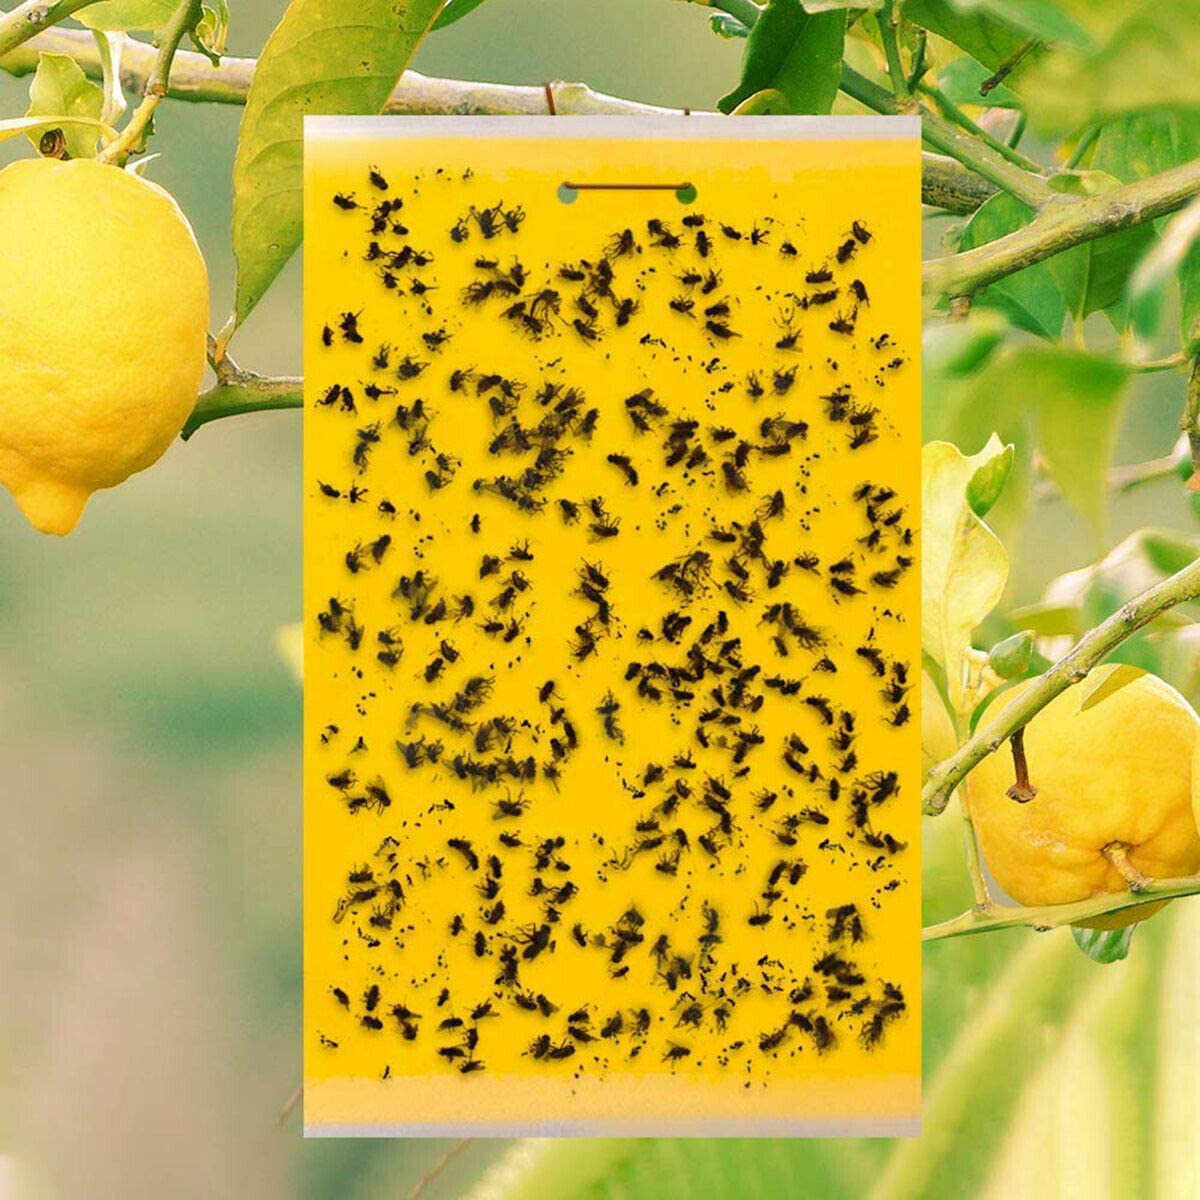 10 pcs Dual-Sided Yellow Sticky Traps for Flying Plant Insect Like Fungus Gnats, Whiteflies, Aphids, Leaf Miners, Thrips, Other Flying Plant Insects - 15x20 cm, Twist Ties Included.